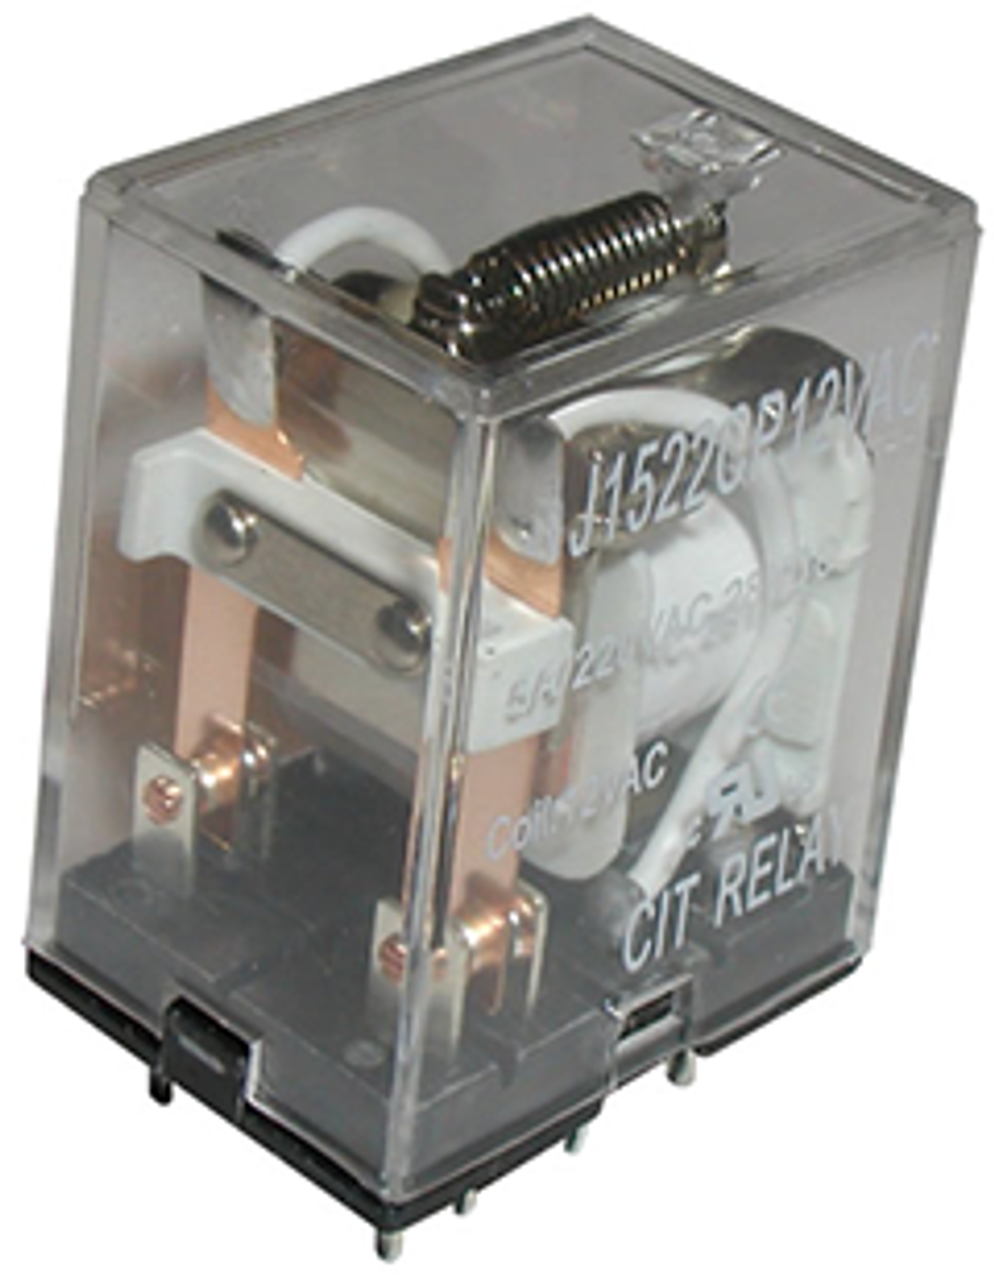 CIT Relay and Switch J1524CP24VDCDT Industrial Relays